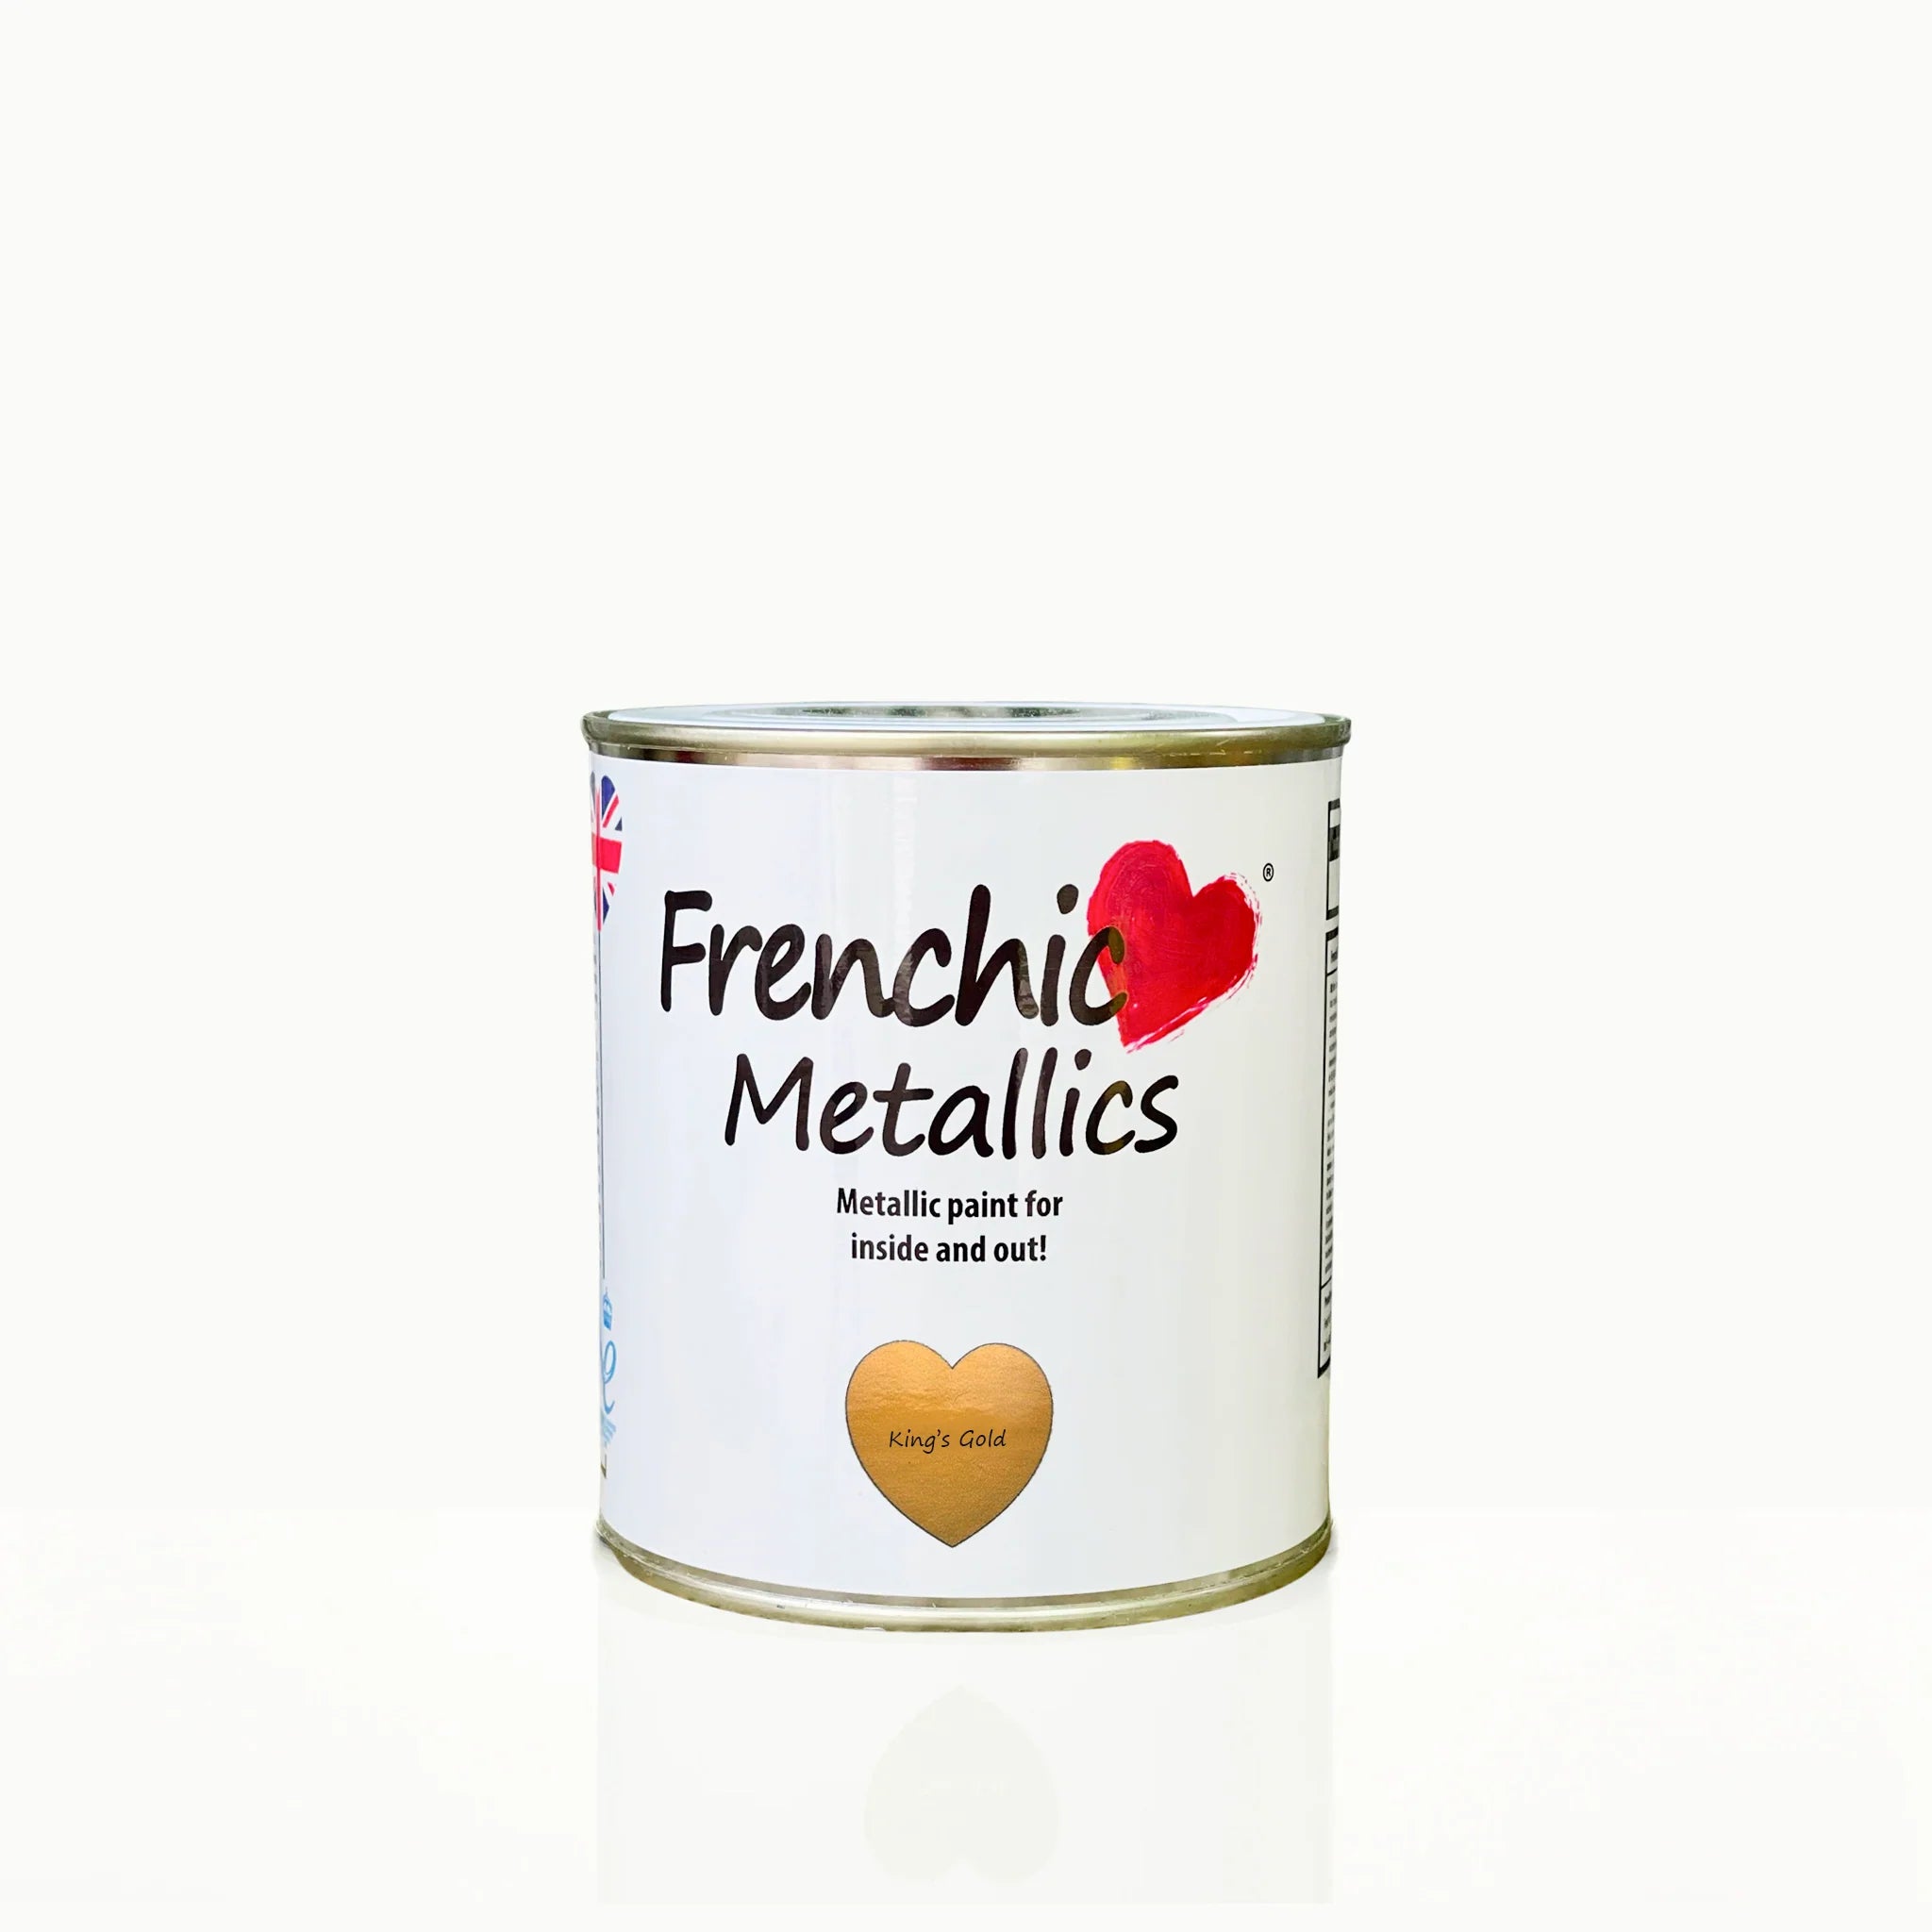 Frenchic Paint | Kings Gold Metallics Limited Edition by Weirs of Baggot Street